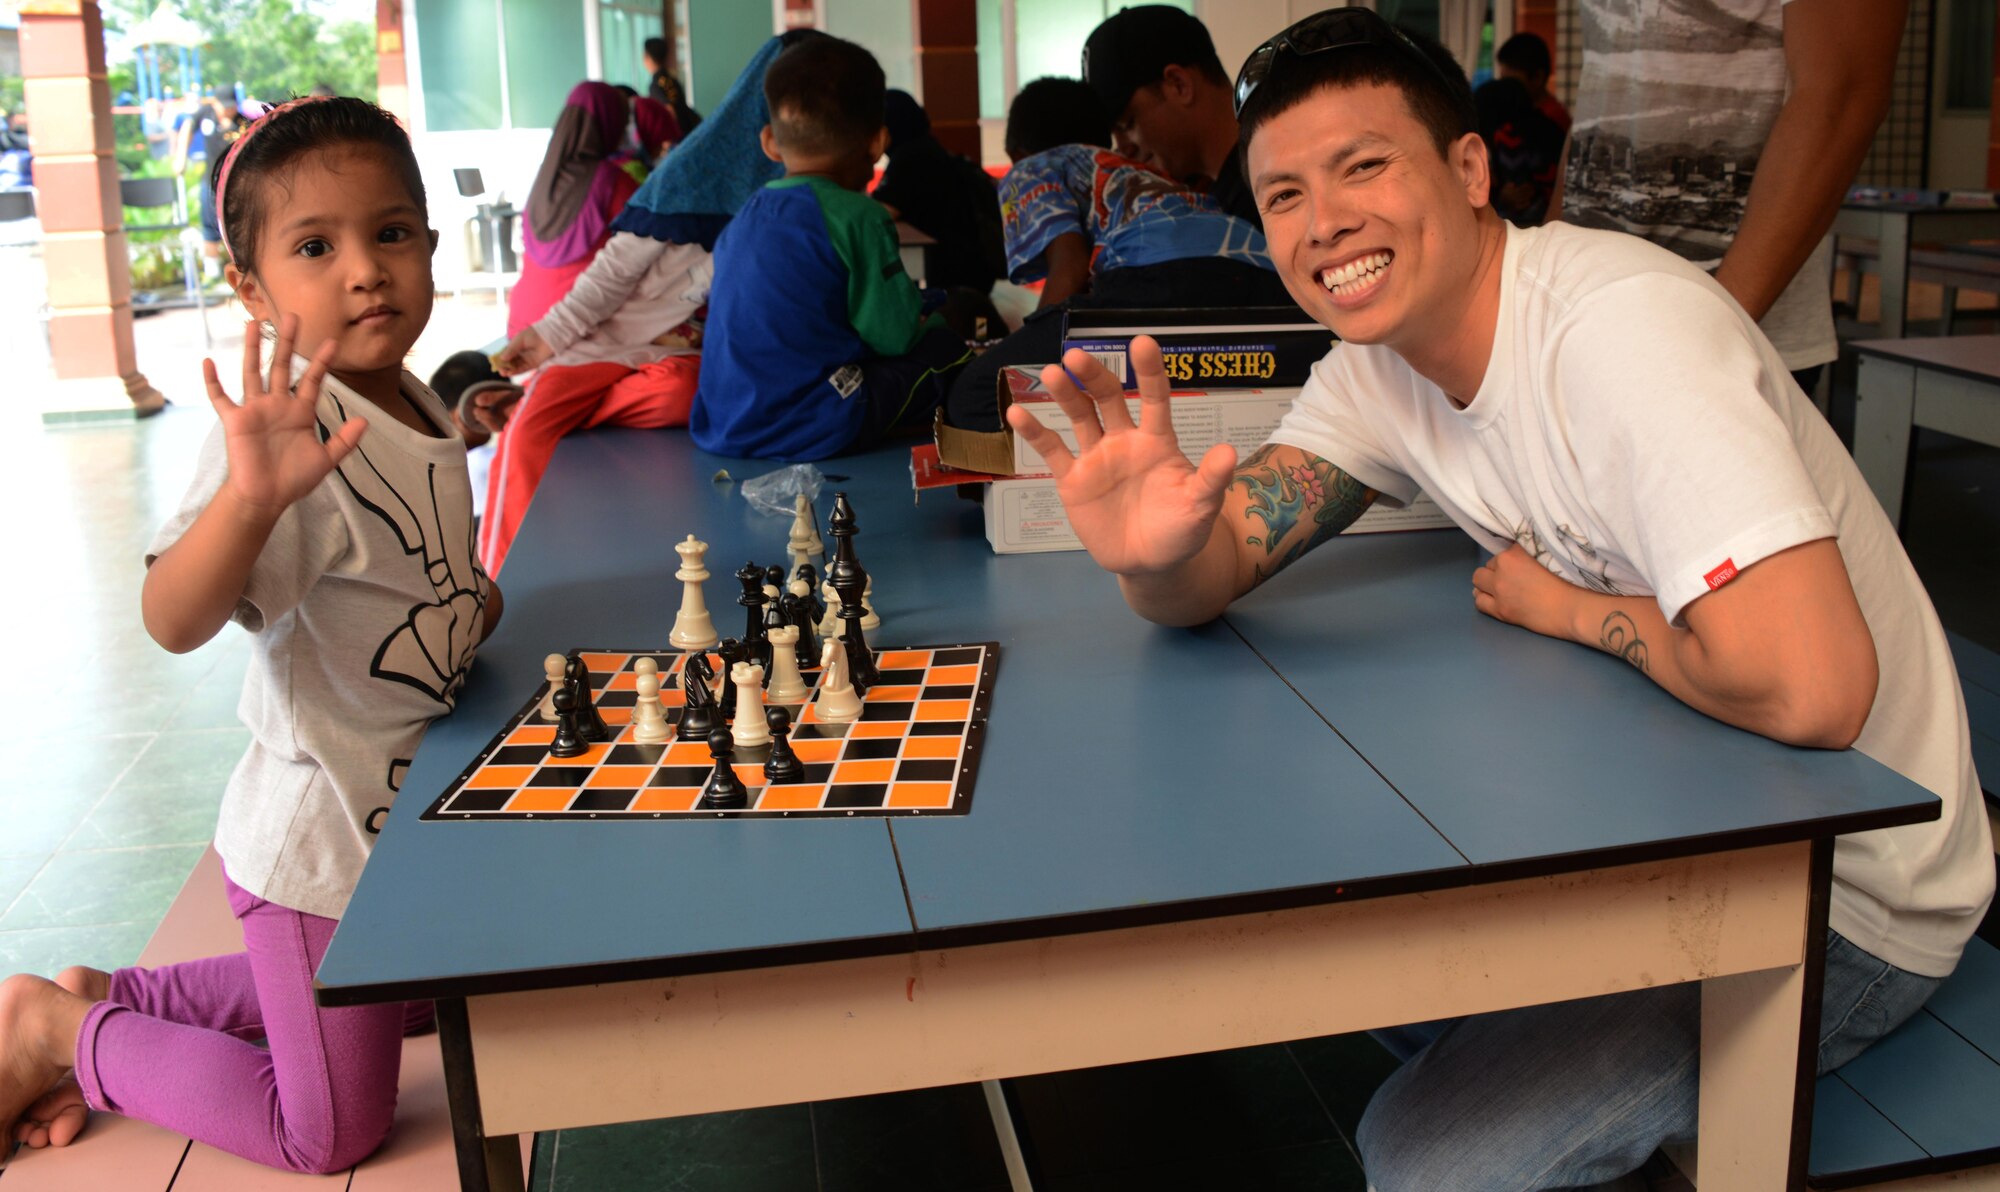 U.S. Air Force Staff Sgt. Tan Pham, 353rd Special Operations Maintenance Squadron, integrated instrument and flight control systems craftsman, plays chess with a young girl from the Rumah Kasih Hormoni Orphanage near Kuala Lumpur, Malaysia, June 6, 2015.  As part of Exercise Teak Mint, members from the RMAF, U.S. Air Force came together to help with repairs around the orphanage and donated more than $1,000 in clothes, games and sports equipment.  (U.S. Air Force photo by Tech. Sgt. Kristine Dreyer)